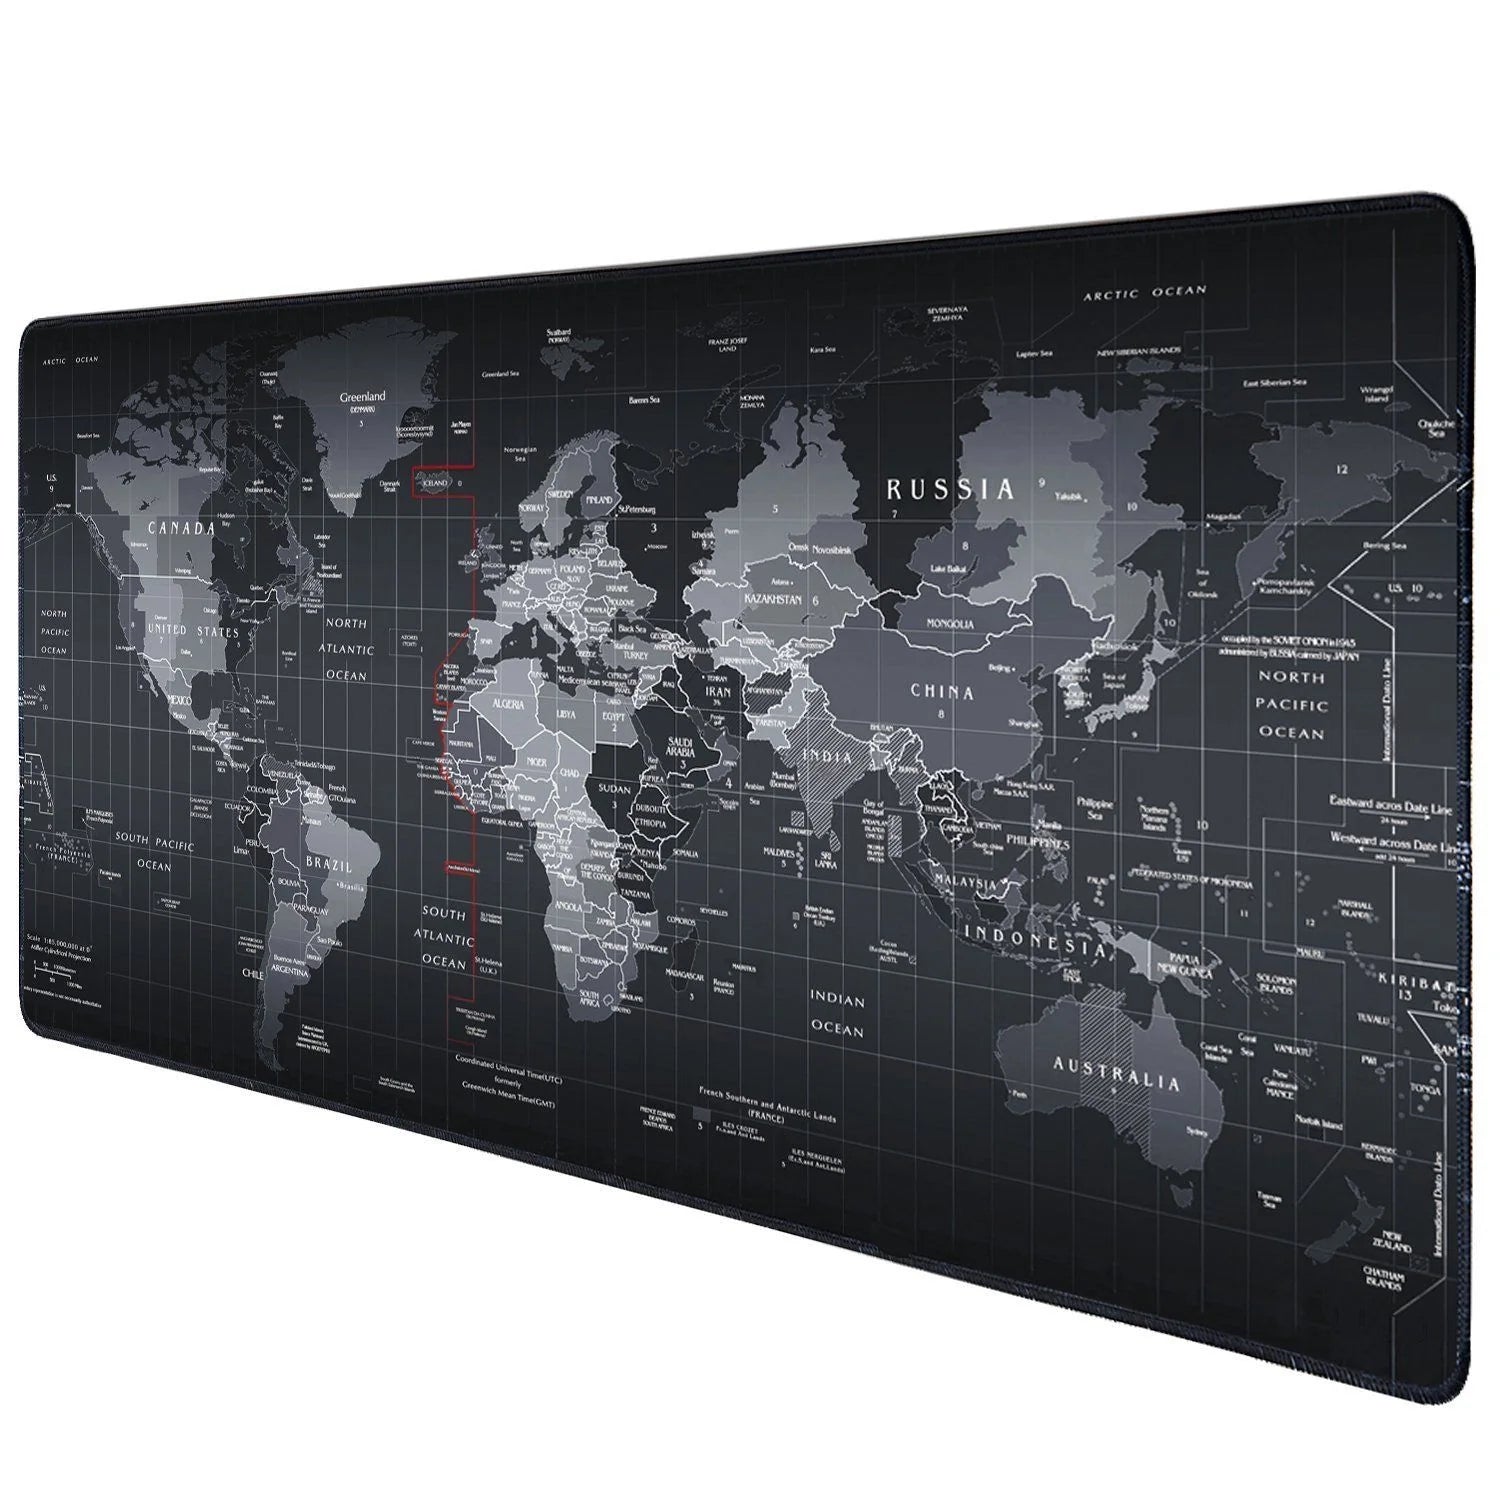 Extended Gaming Mouse Pad - Everyday-Sales.com